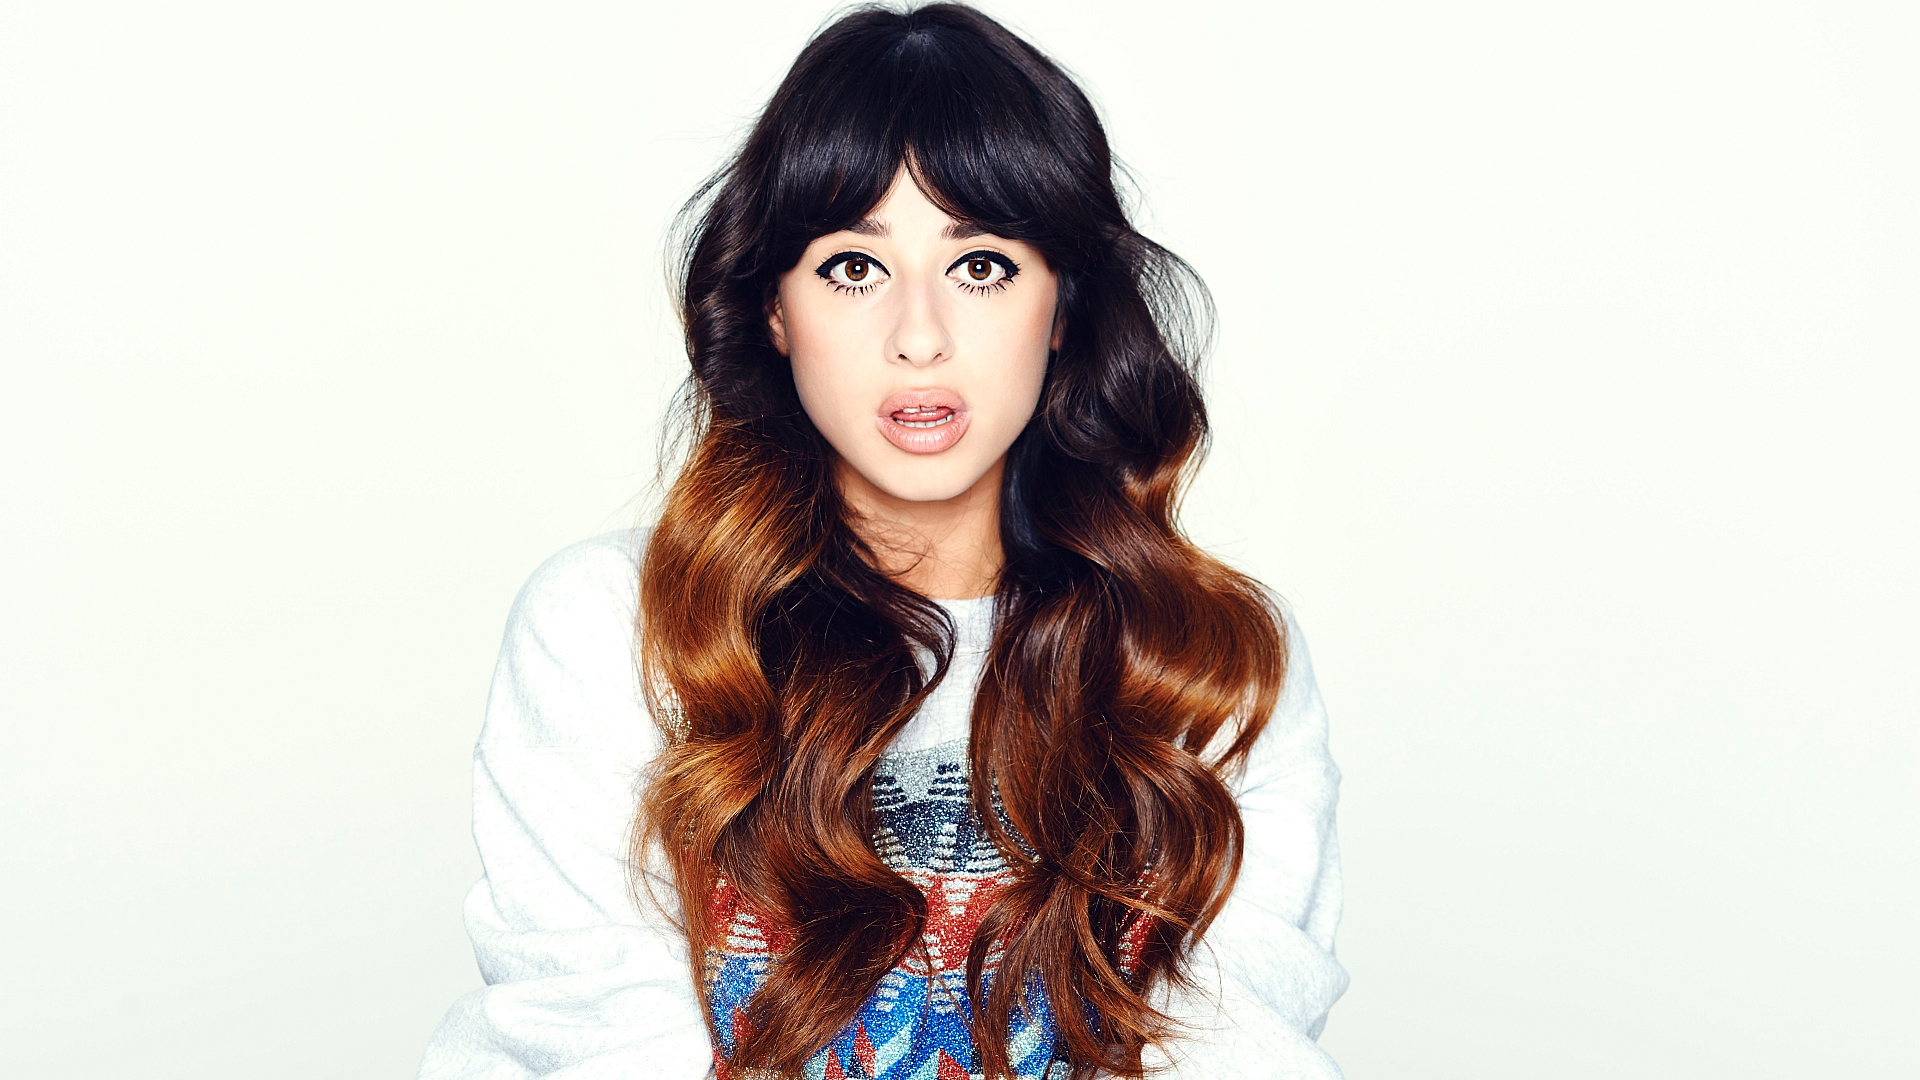 Foxes British Singer Wallpapers